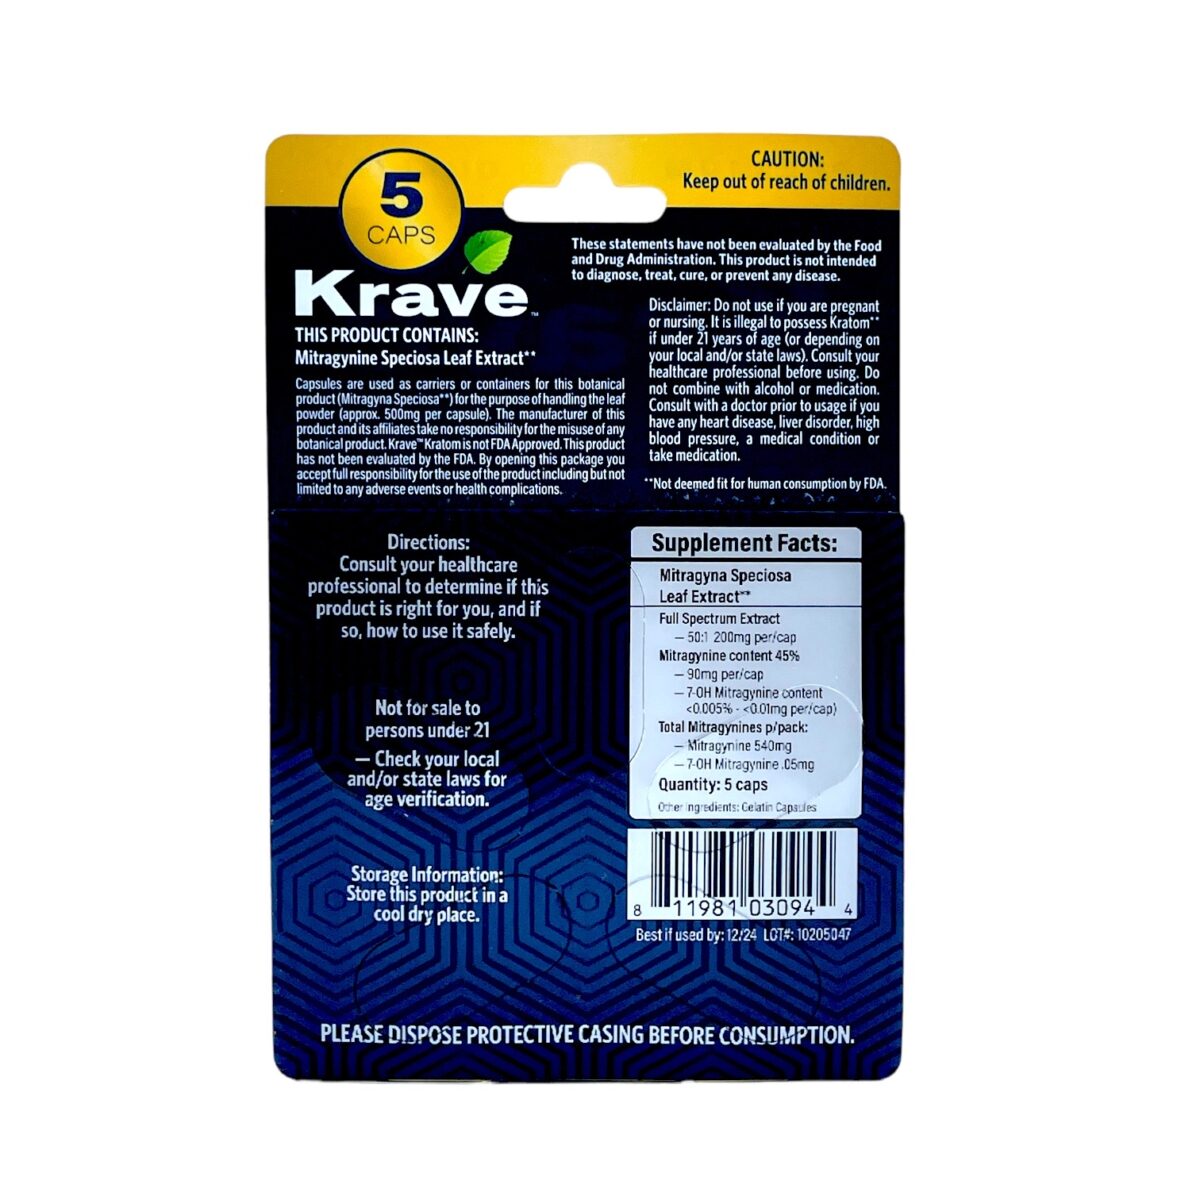 Krave Ultra Enhanced Indo Kratom Extract, 5 count